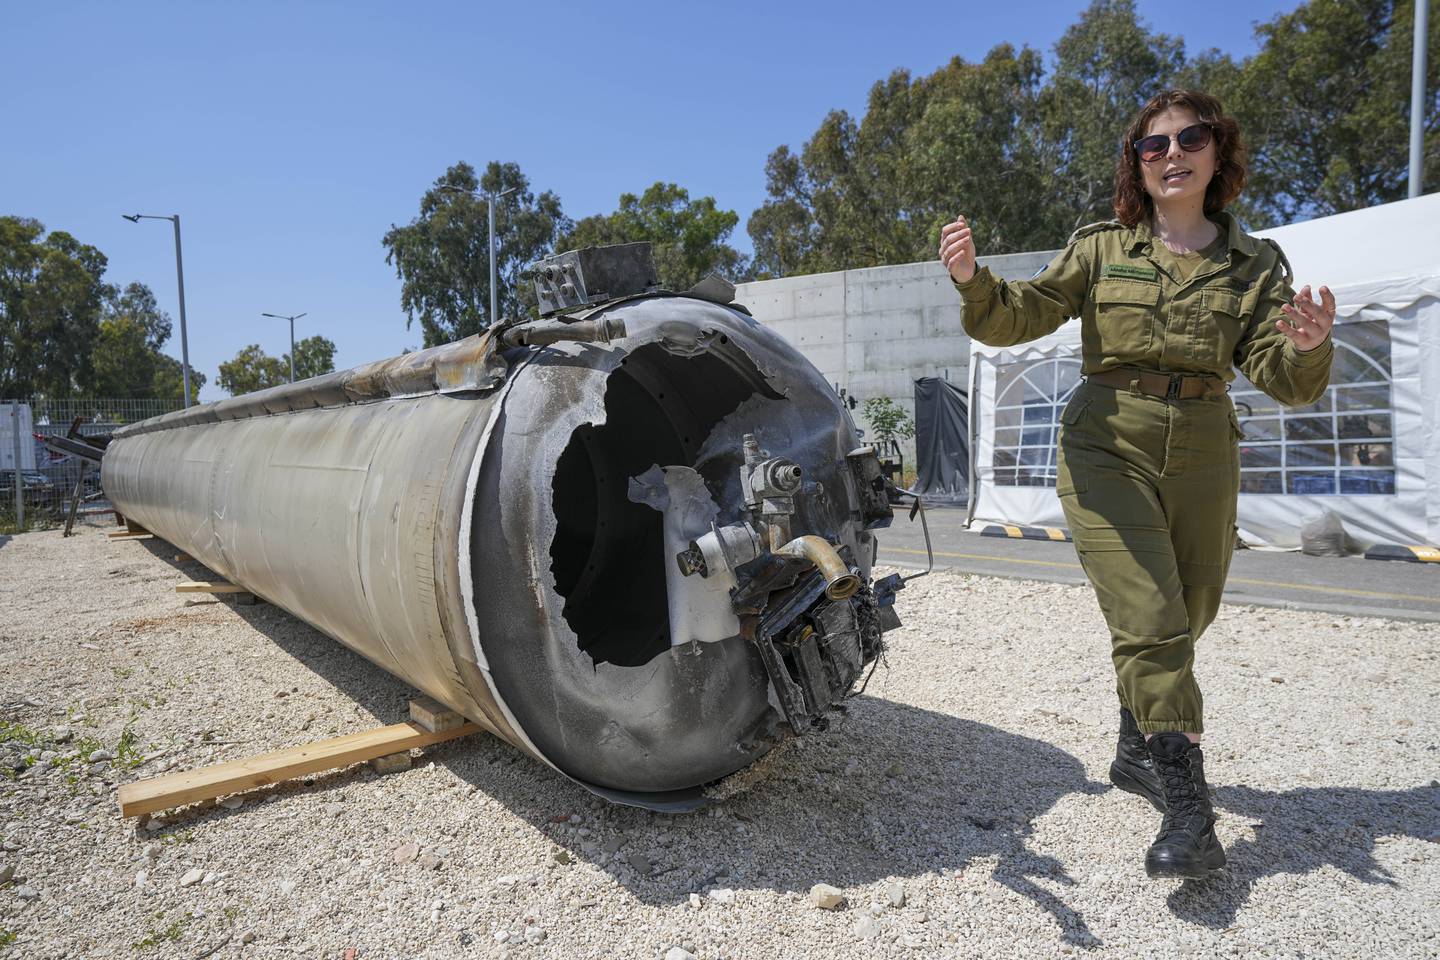 Israeli military deputy head of the IDF International press department, first lieutenant Masha Michelson, display to the media one of the Iranian ballistic missiles Israel intercepted over the weekend, in Julis army base, southern Israel, Tuesday, April 16, 2024. Israel says that Iran launched over 300 missiles and attack drones in the weekend attack. It says most of the incoming fire was intercepted, but a handful of missiles landed in Israel, causing minor damage and wounding a young girl. (AP Photo/Tsafrir Abayov)